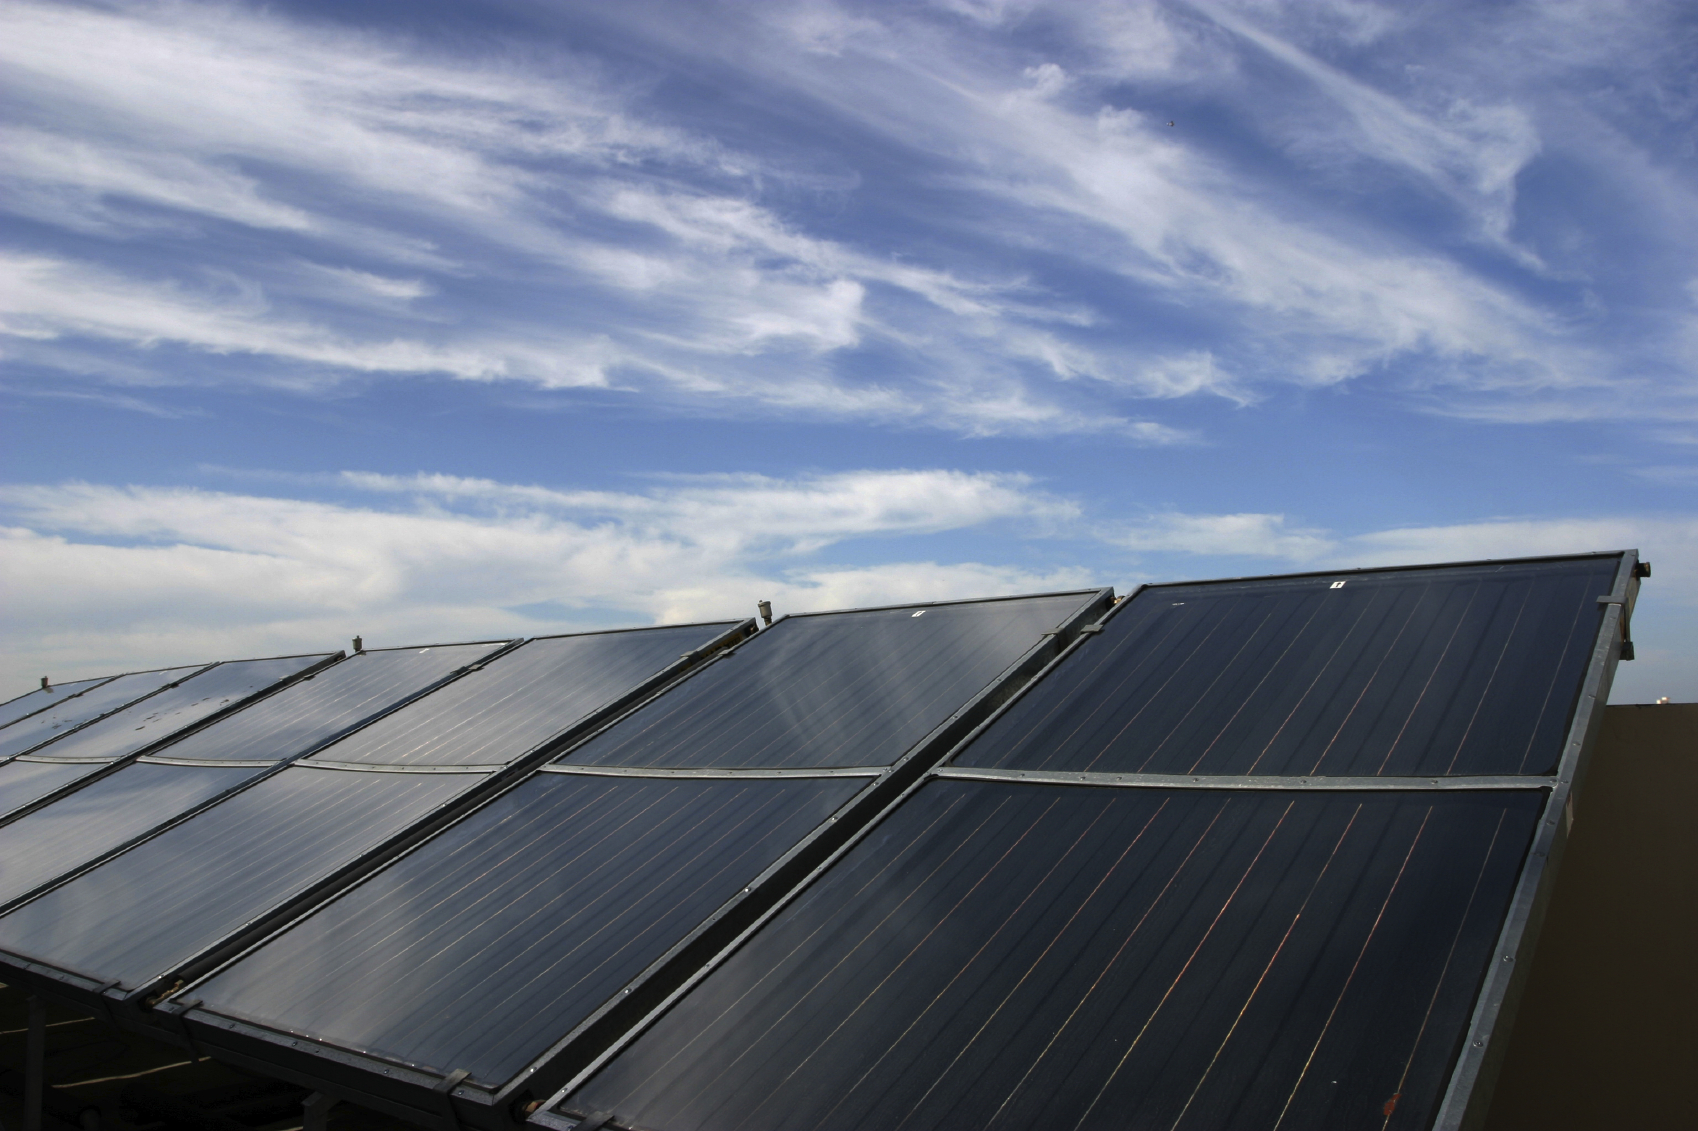 fpl-to-install-30-million-solar-panels-in-florida